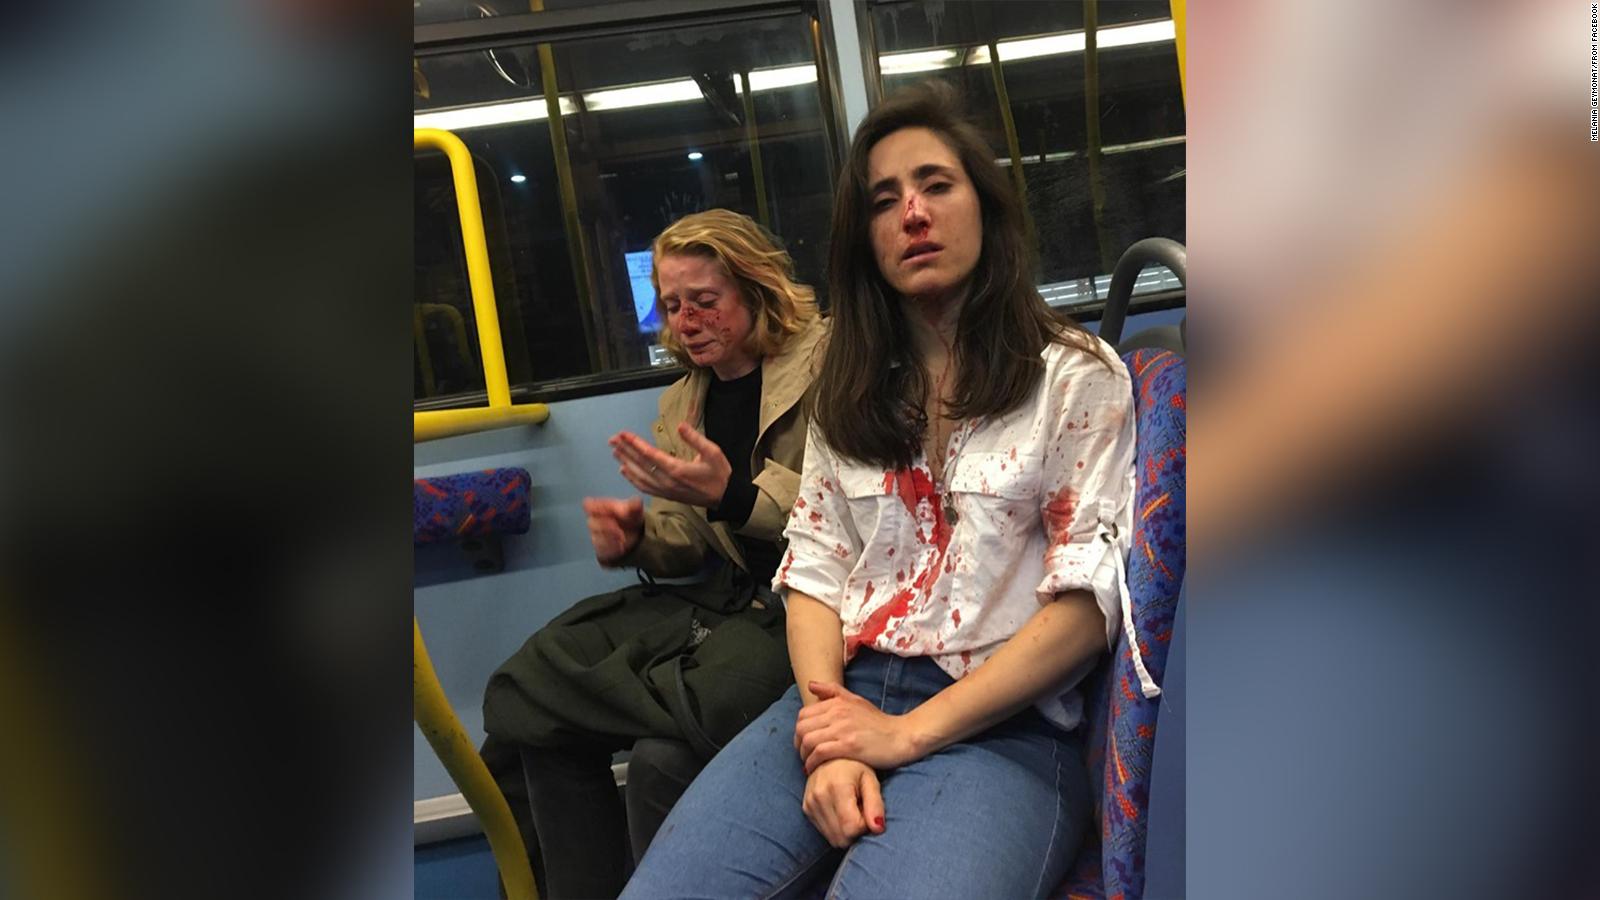 Police Lesbian Couple Attacked On London Bus Cnn Video